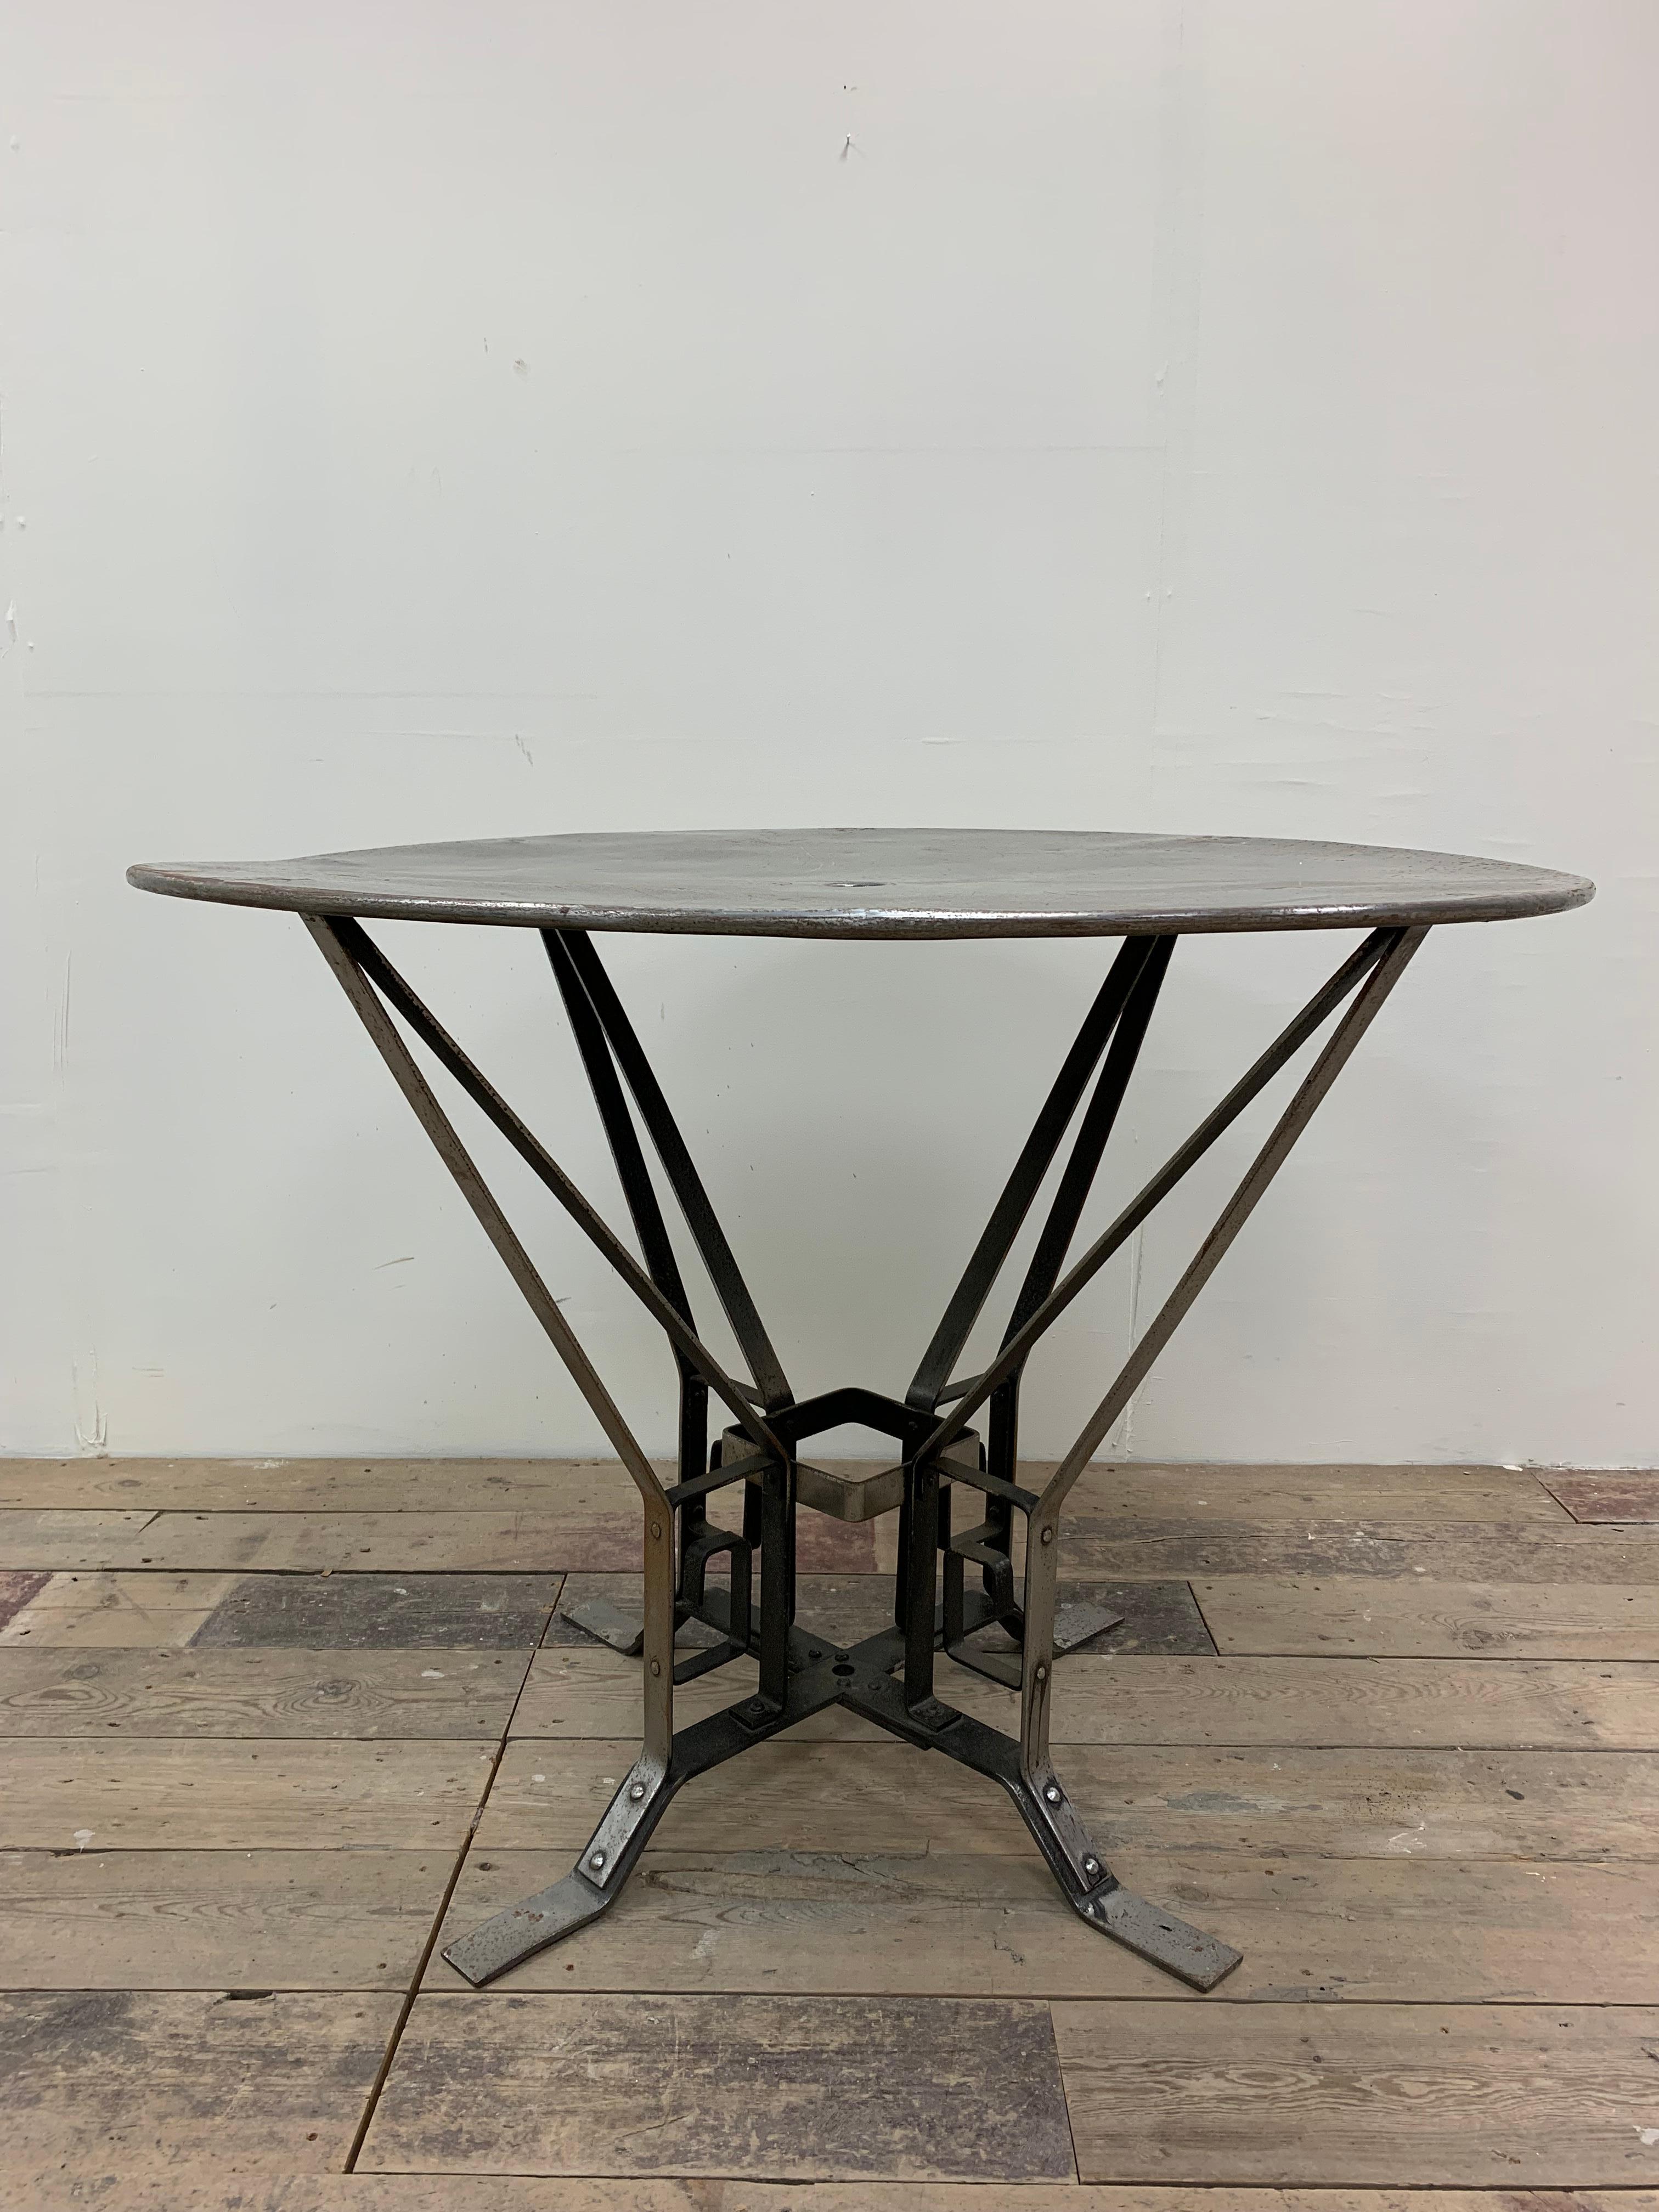 1930s Art Deco French Architecturally Inspired Polished Metal Garden Table  In Fair Condition For Sale In London, GB